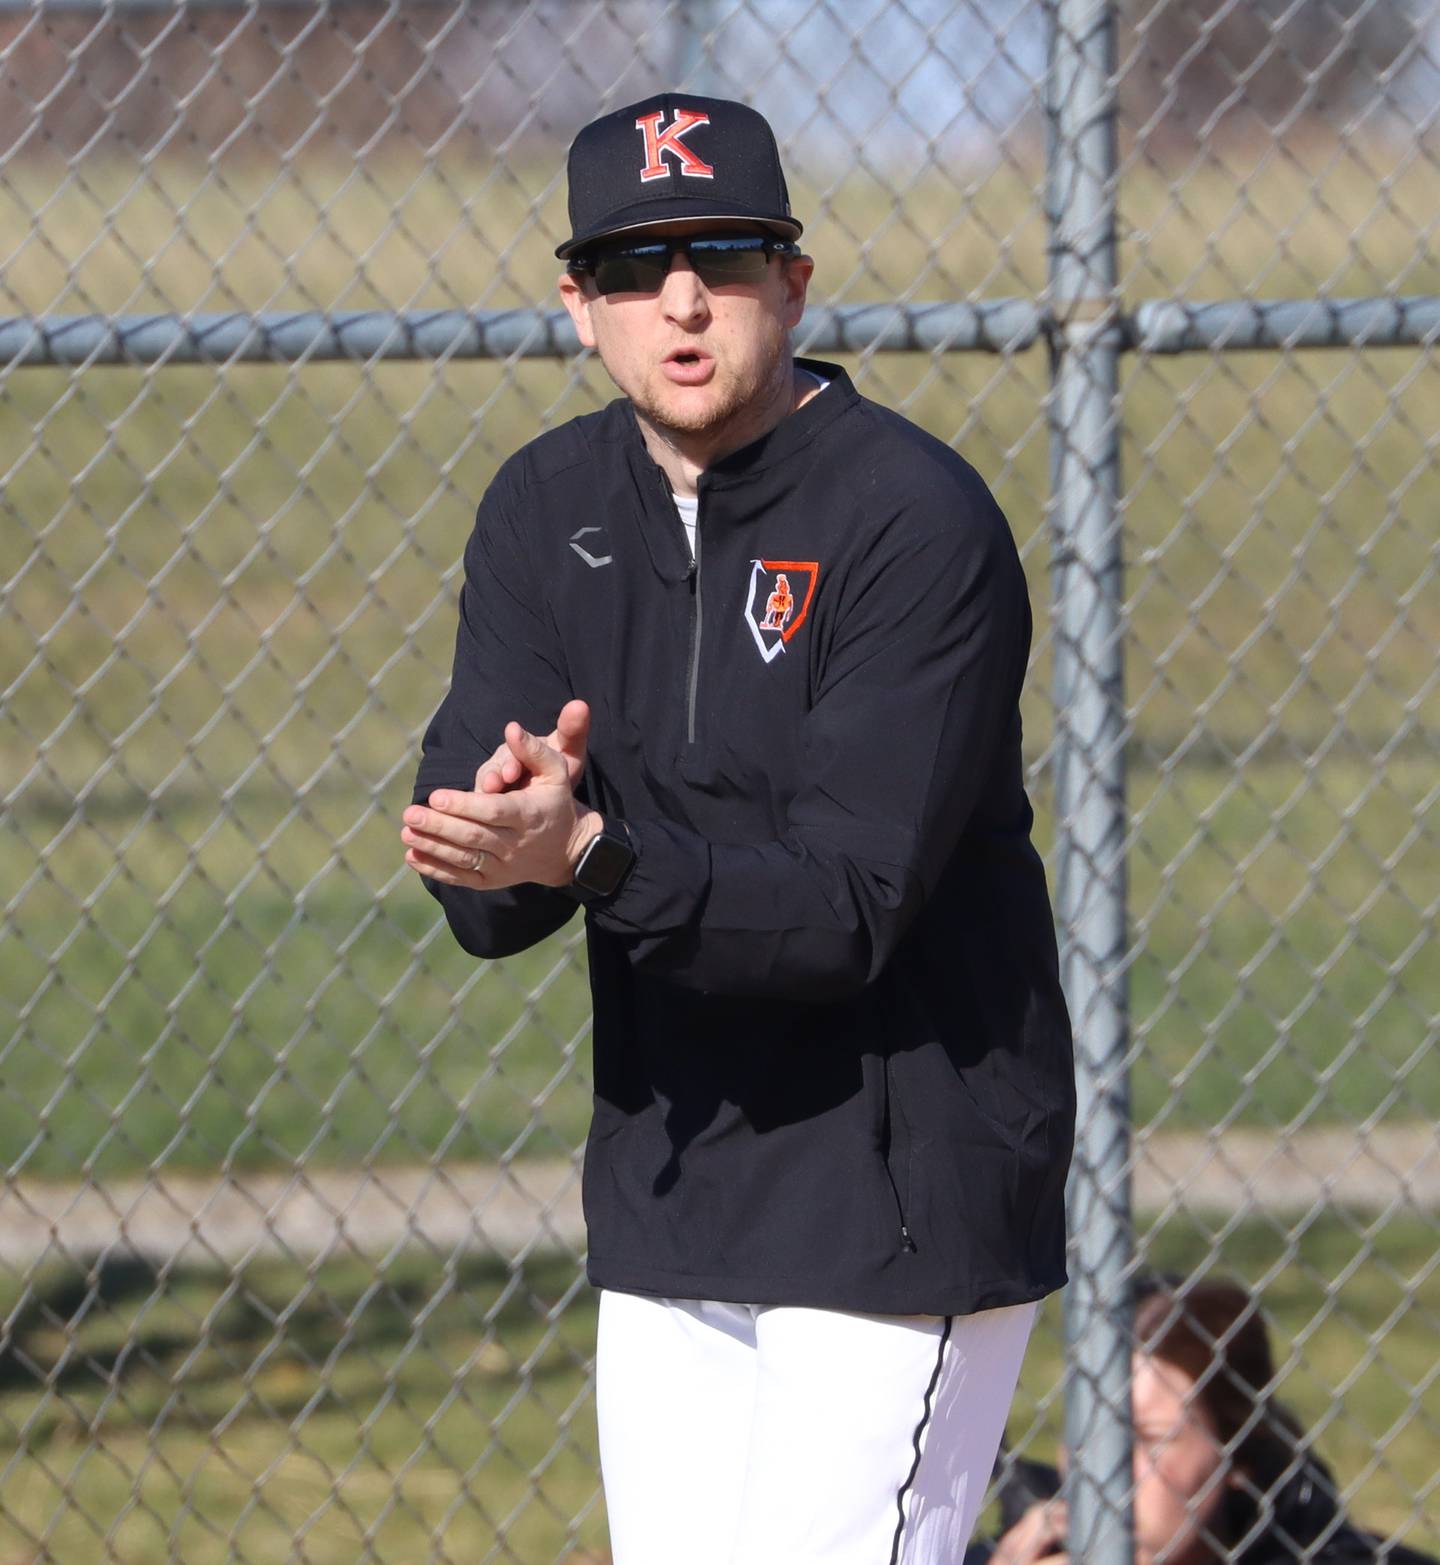 Jon Henegar, 34, who coaches F/S baseball and has been a varsity boys basketball assistant at Kewanee High School, has been named as the new varsity girls basketball coach at Bureau Valley. He is a 2008 Princeton High School coach.